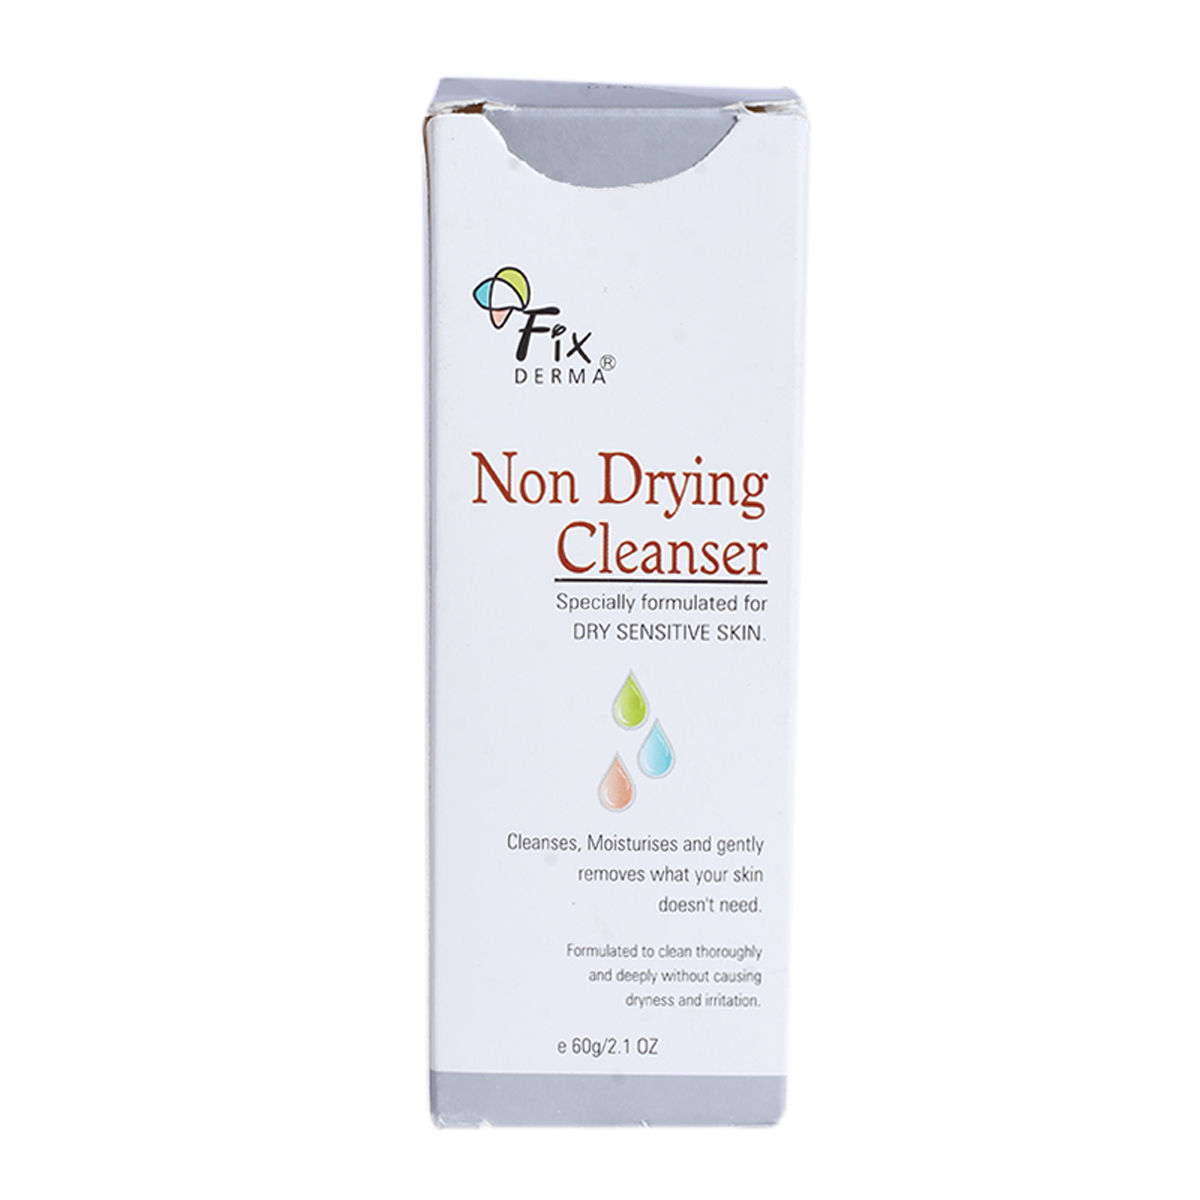 Fixderma Non Drying Clenser 60gm, Pack of 1 